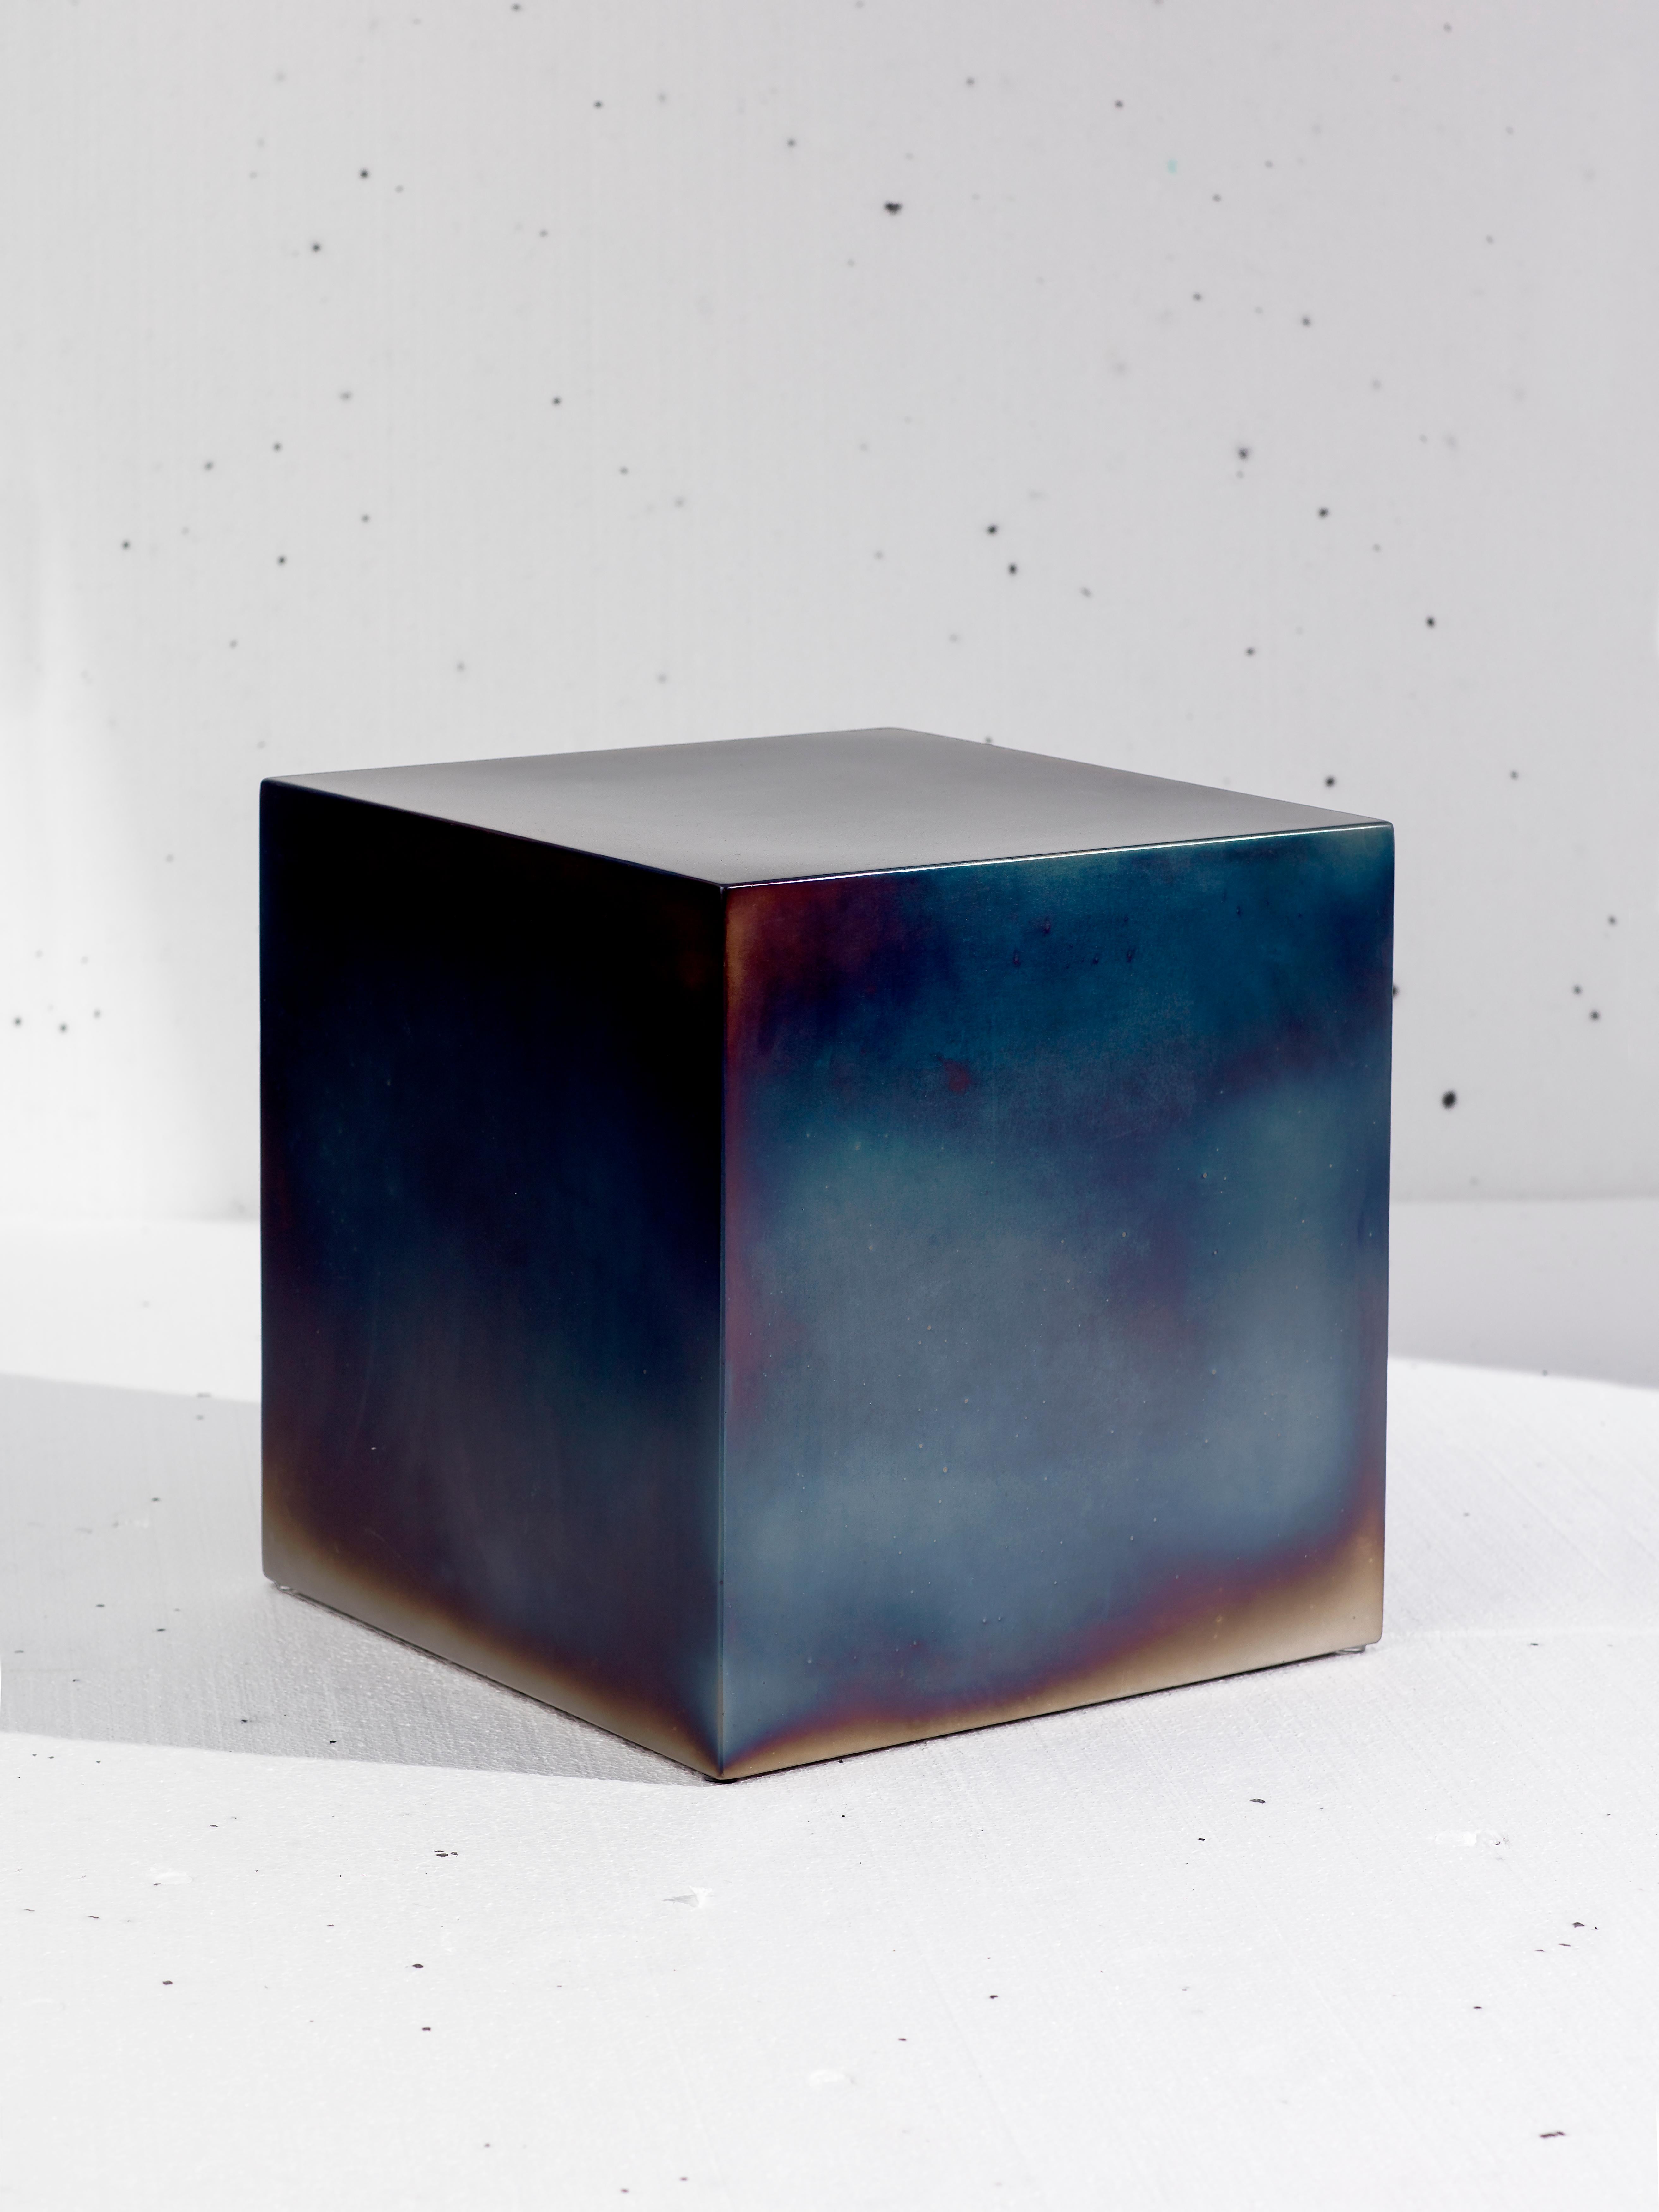 The steel version of the contemporary design classic Candy Cube by the Dutch designer Sabine Marcelis. 

The tempered steel finish takes on a different angle compared to the resin cubes that are seemingly solid objects with a magical glowing edge.